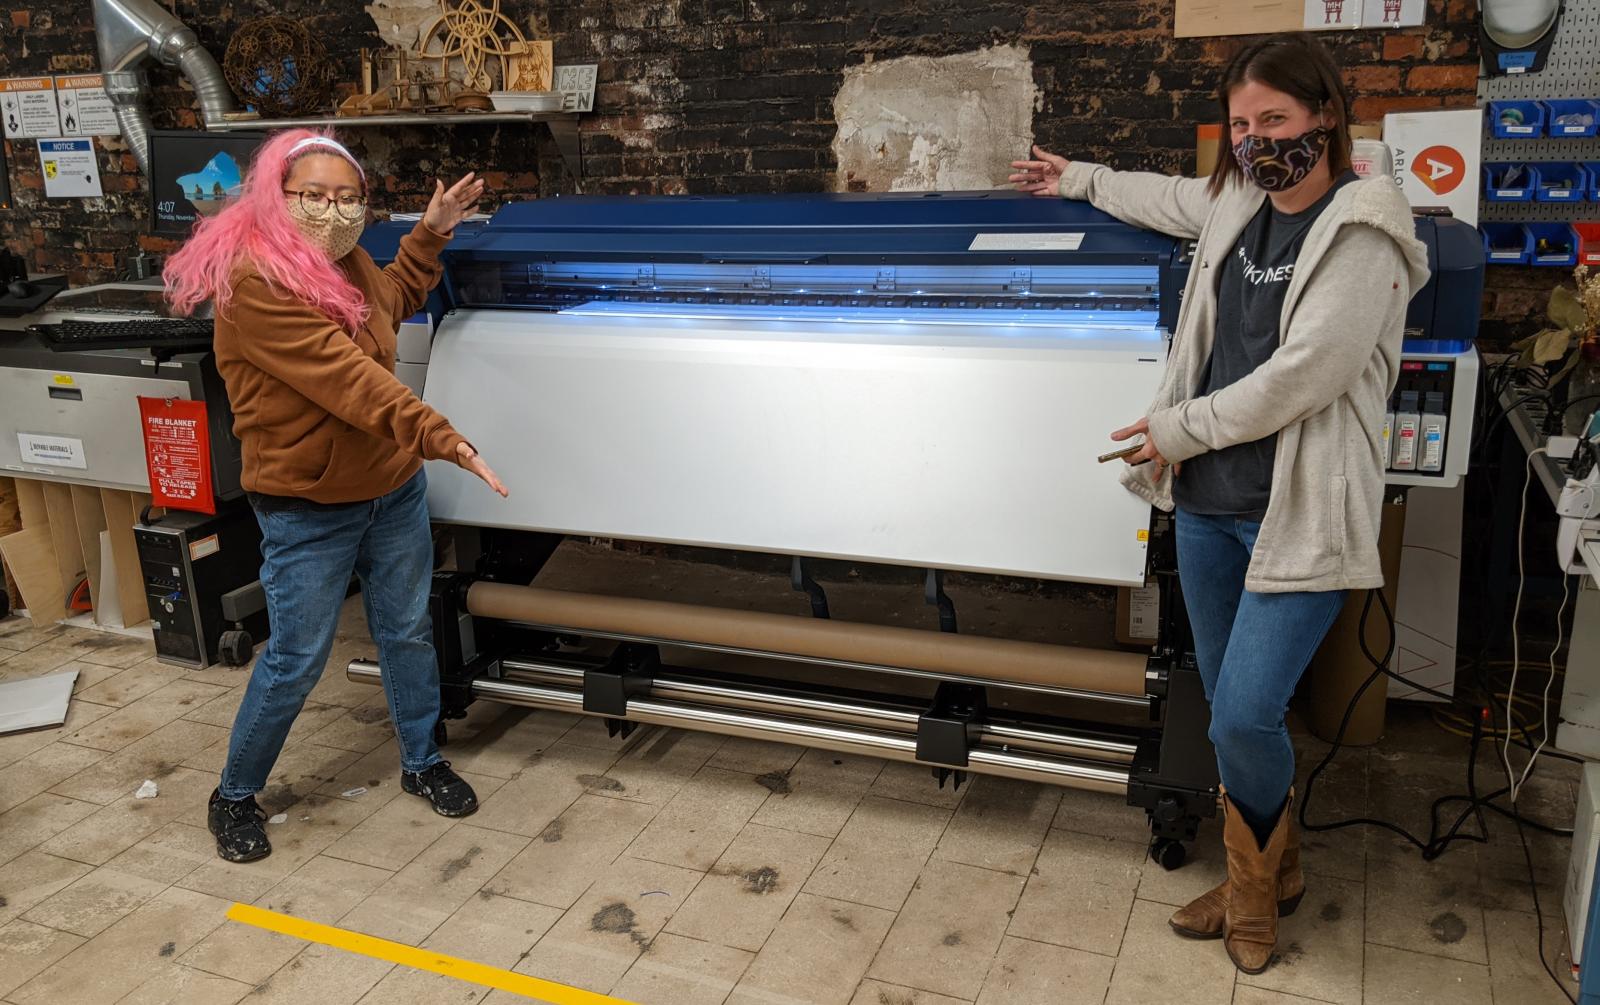 MakeHaven members Ruby and Kate display the new large format printer that arrived at MakeHaven in the fall of 2020